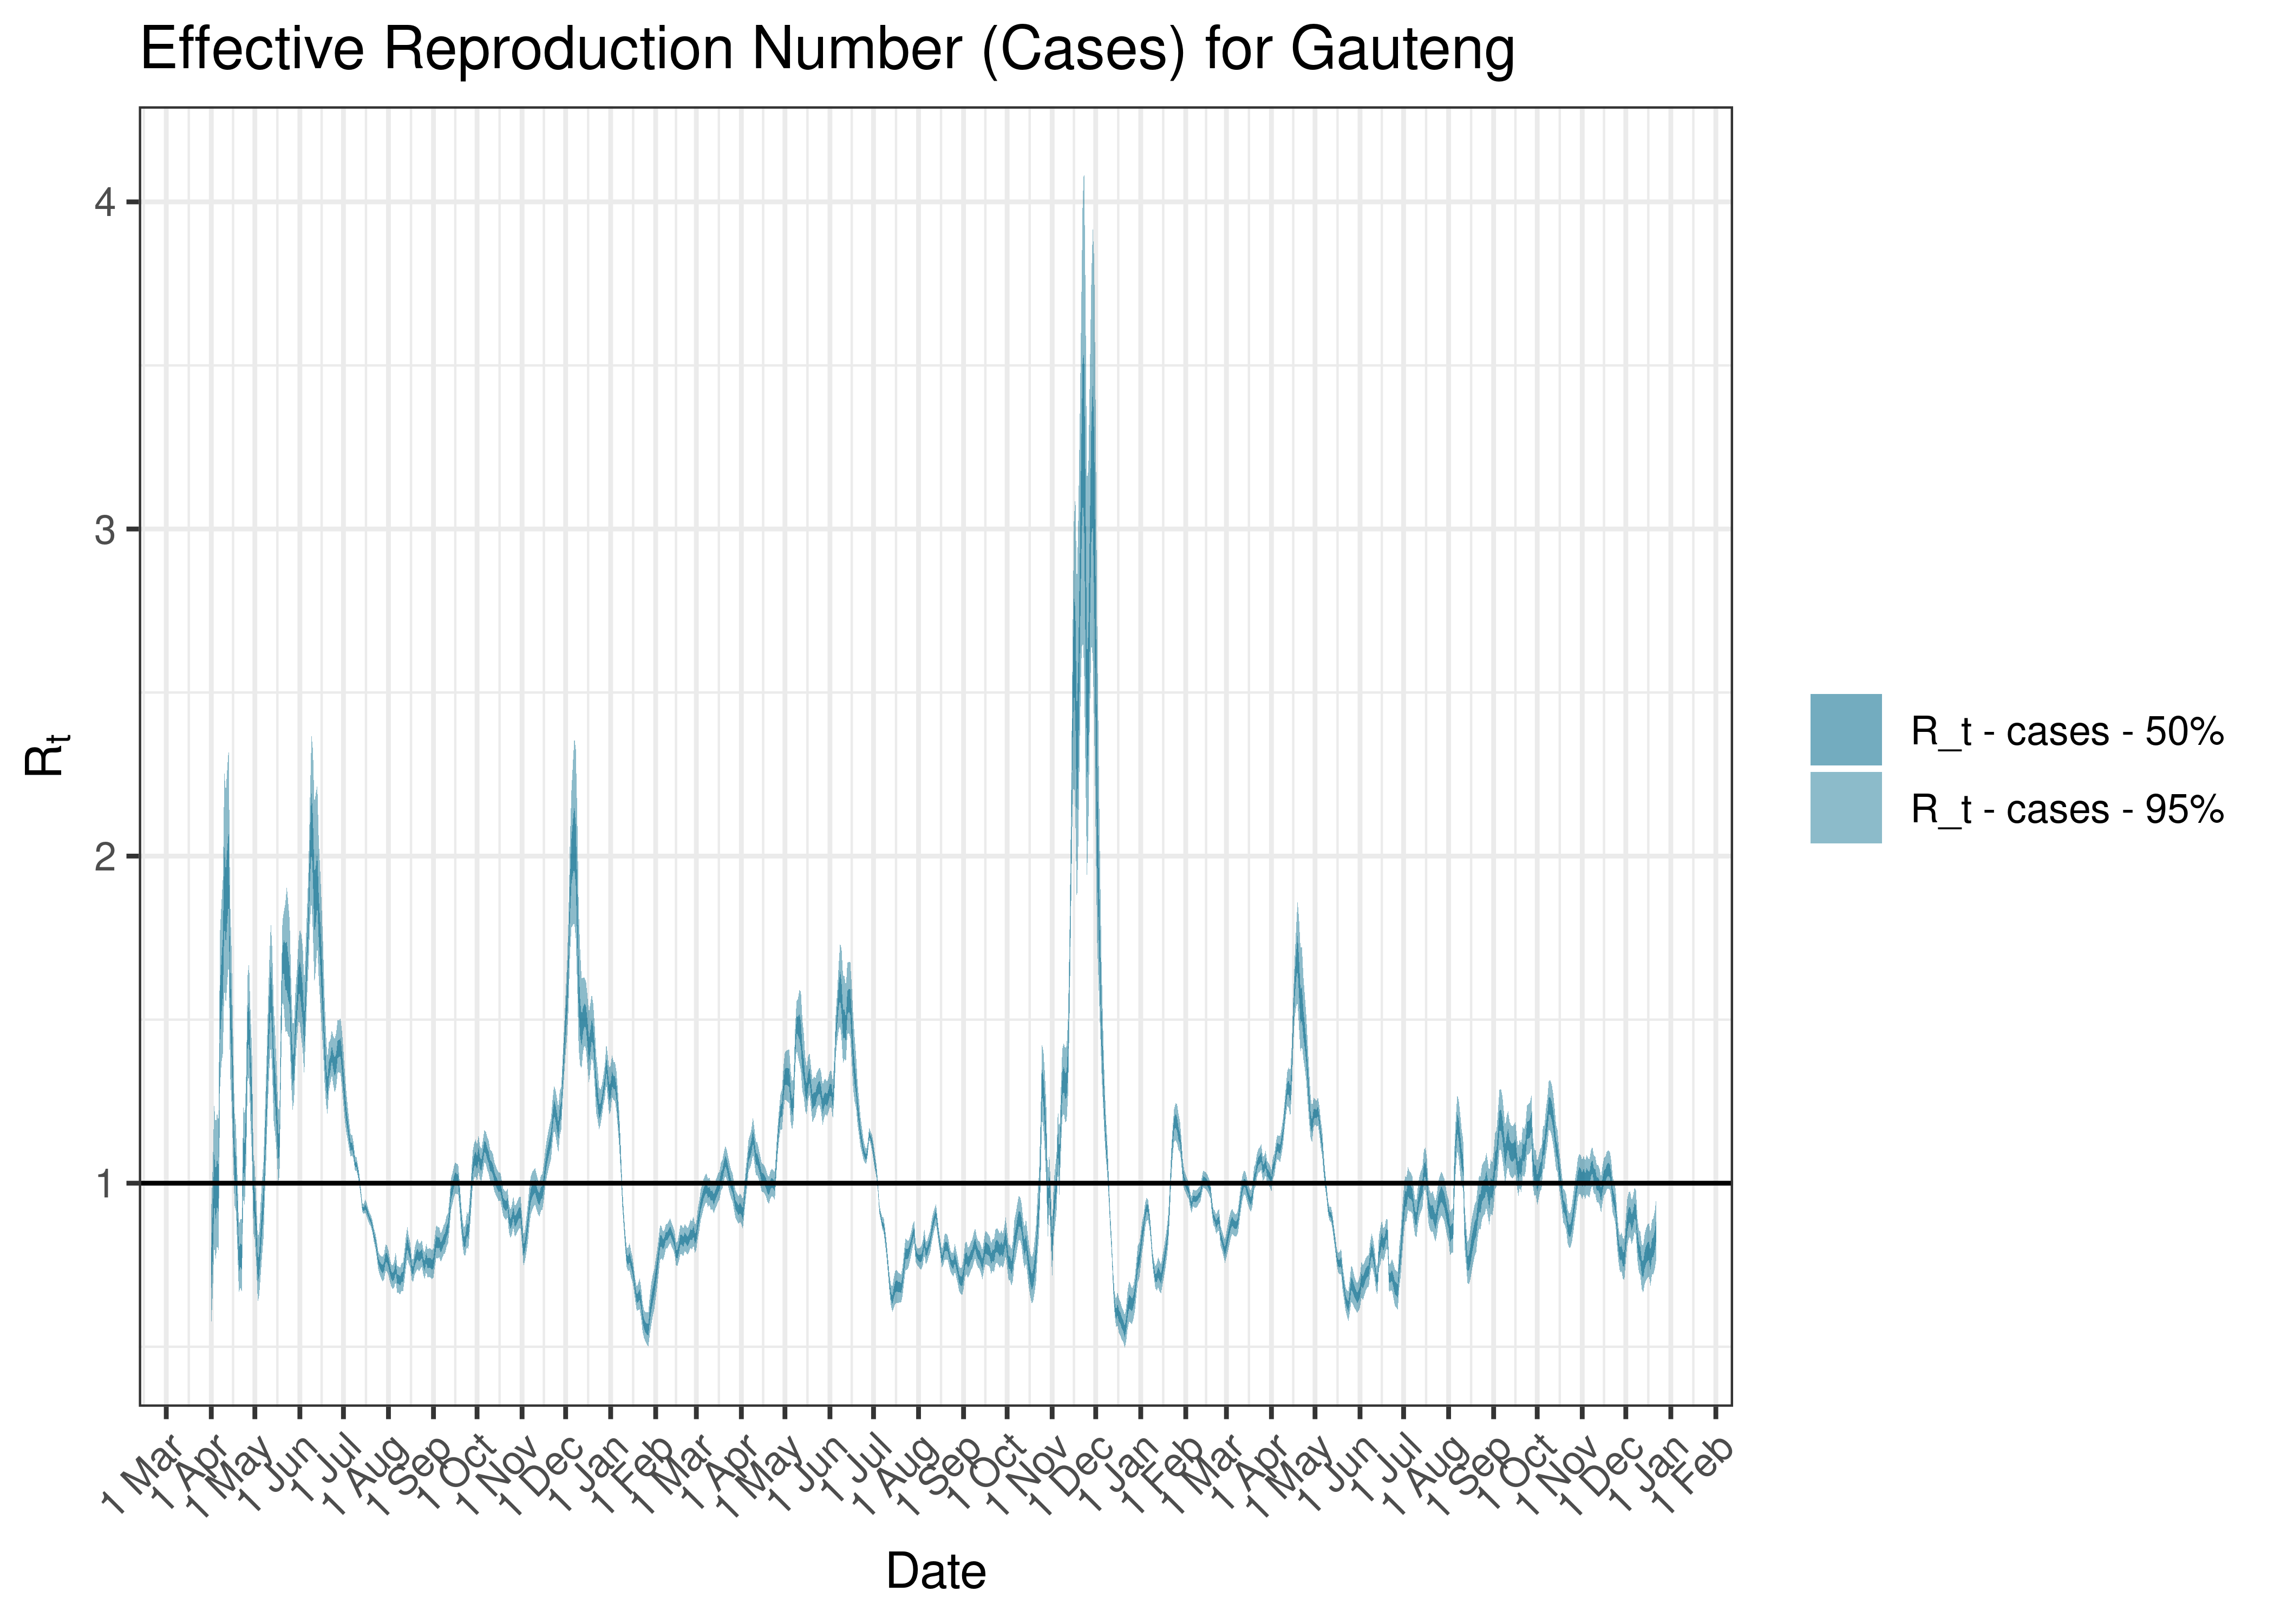 Estimated Effective Reproduction Number Based on Cases for Gauteng since 1 April 2020